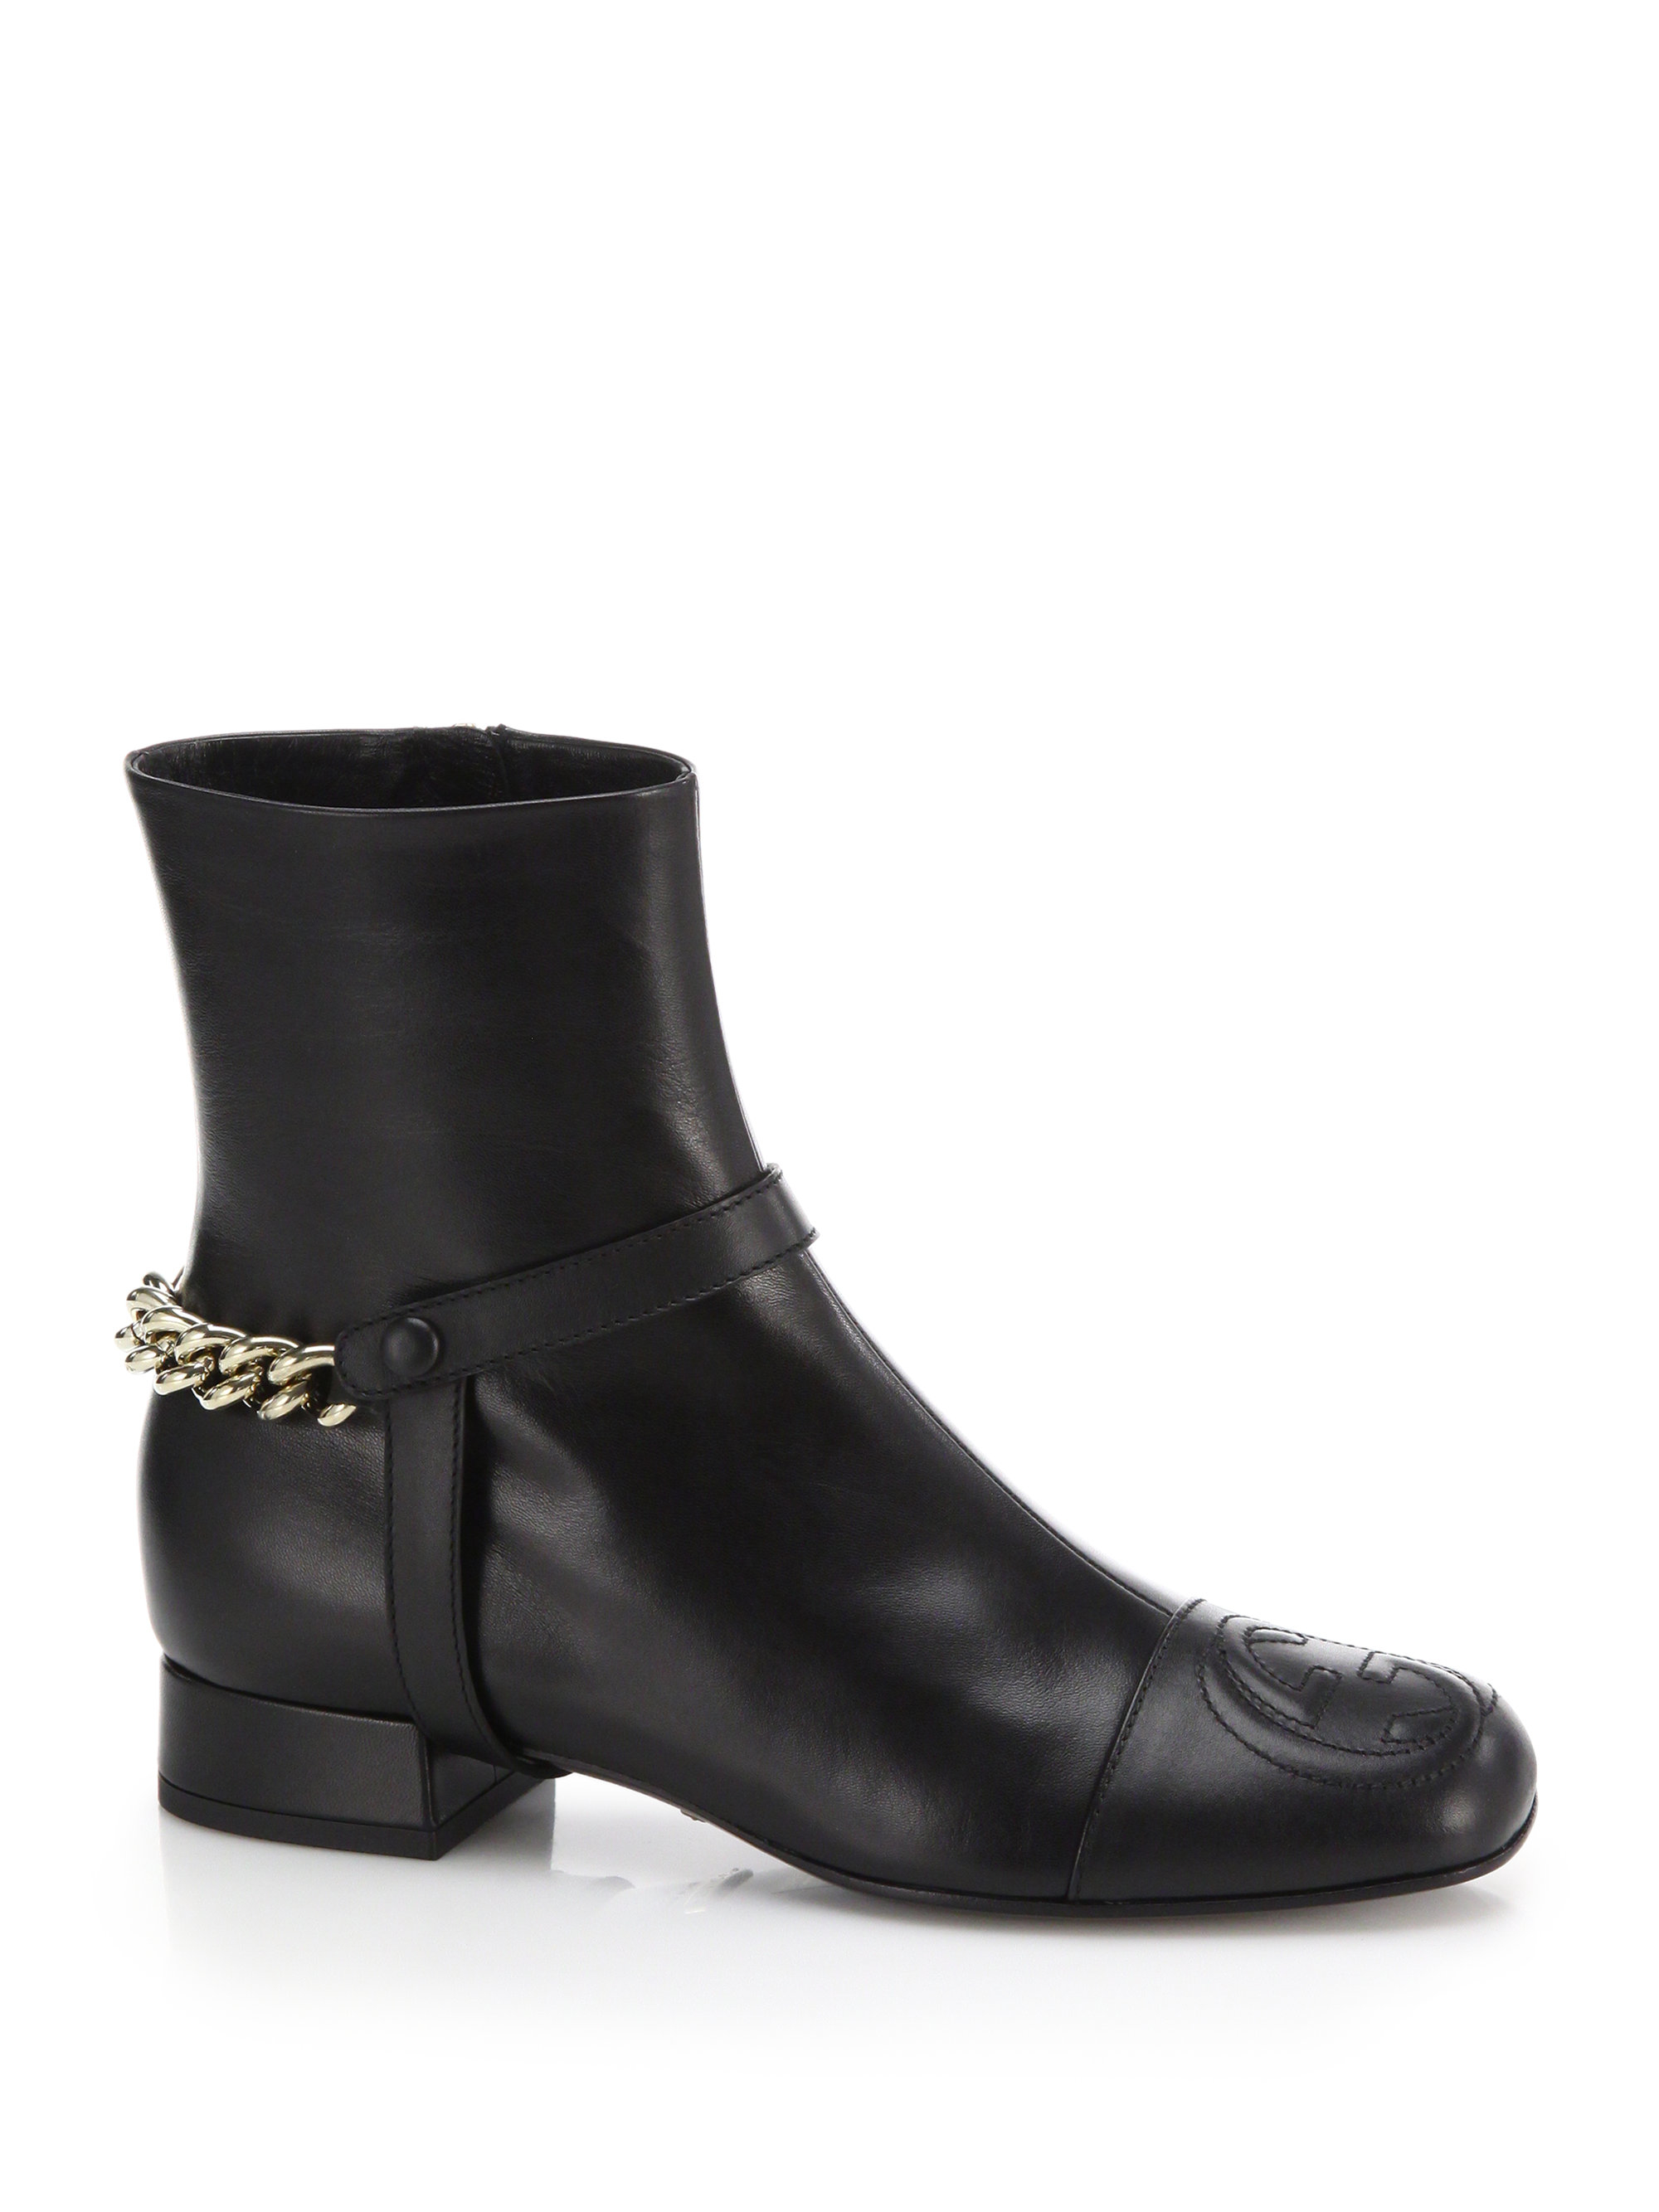 Gucci Soho Leather Chain-detail Ankle Boots in Black - Lyst